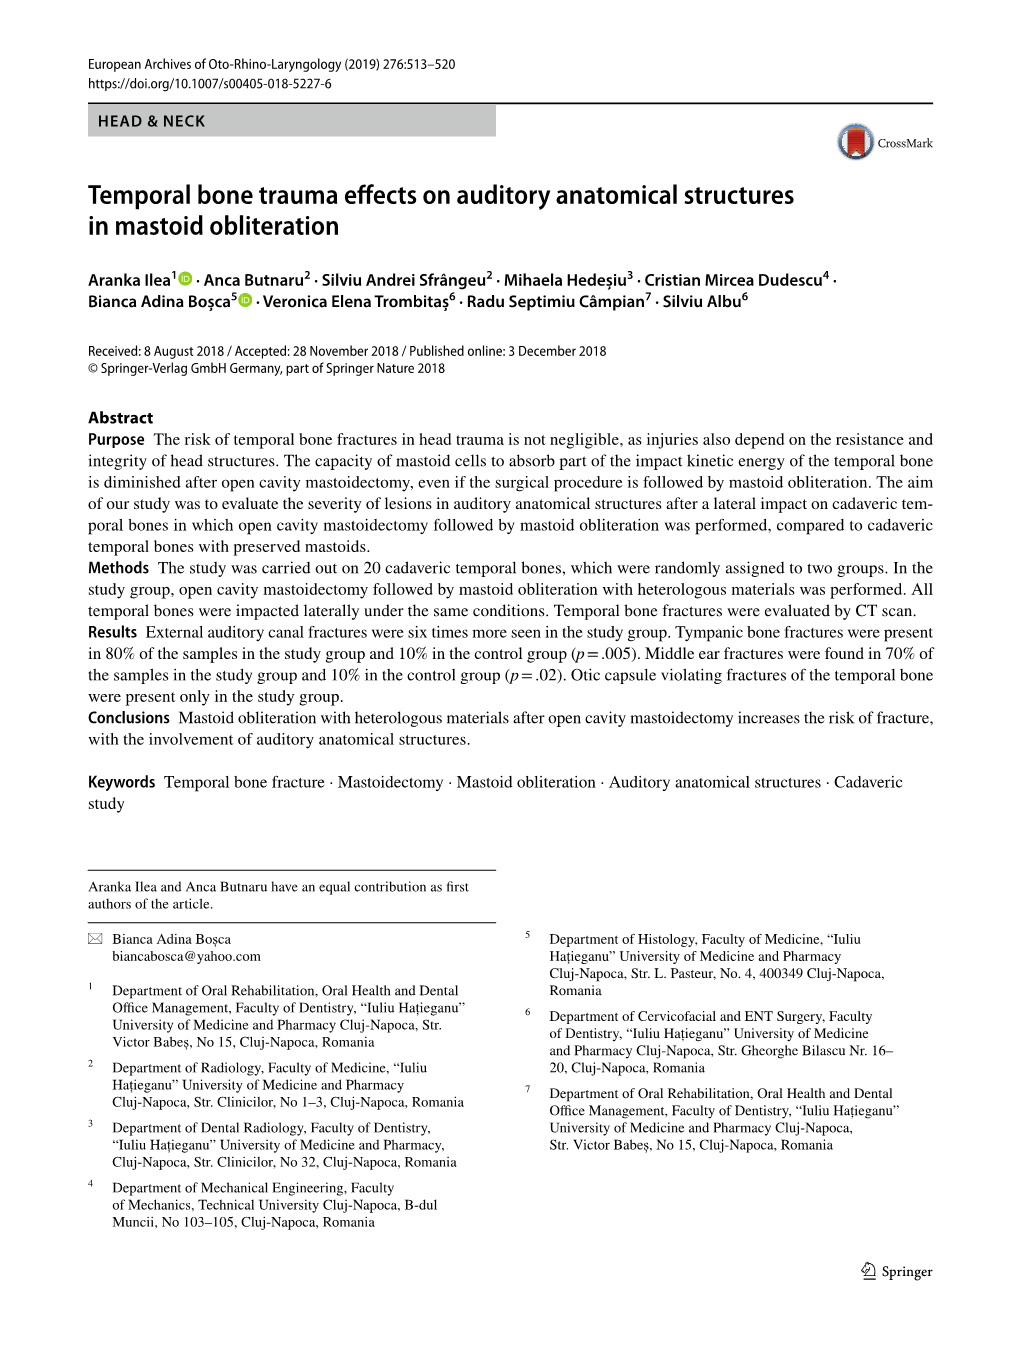 Temporal Bone Trauma Effects on Auditory Anatomical Structures in Mastoid Obliteration